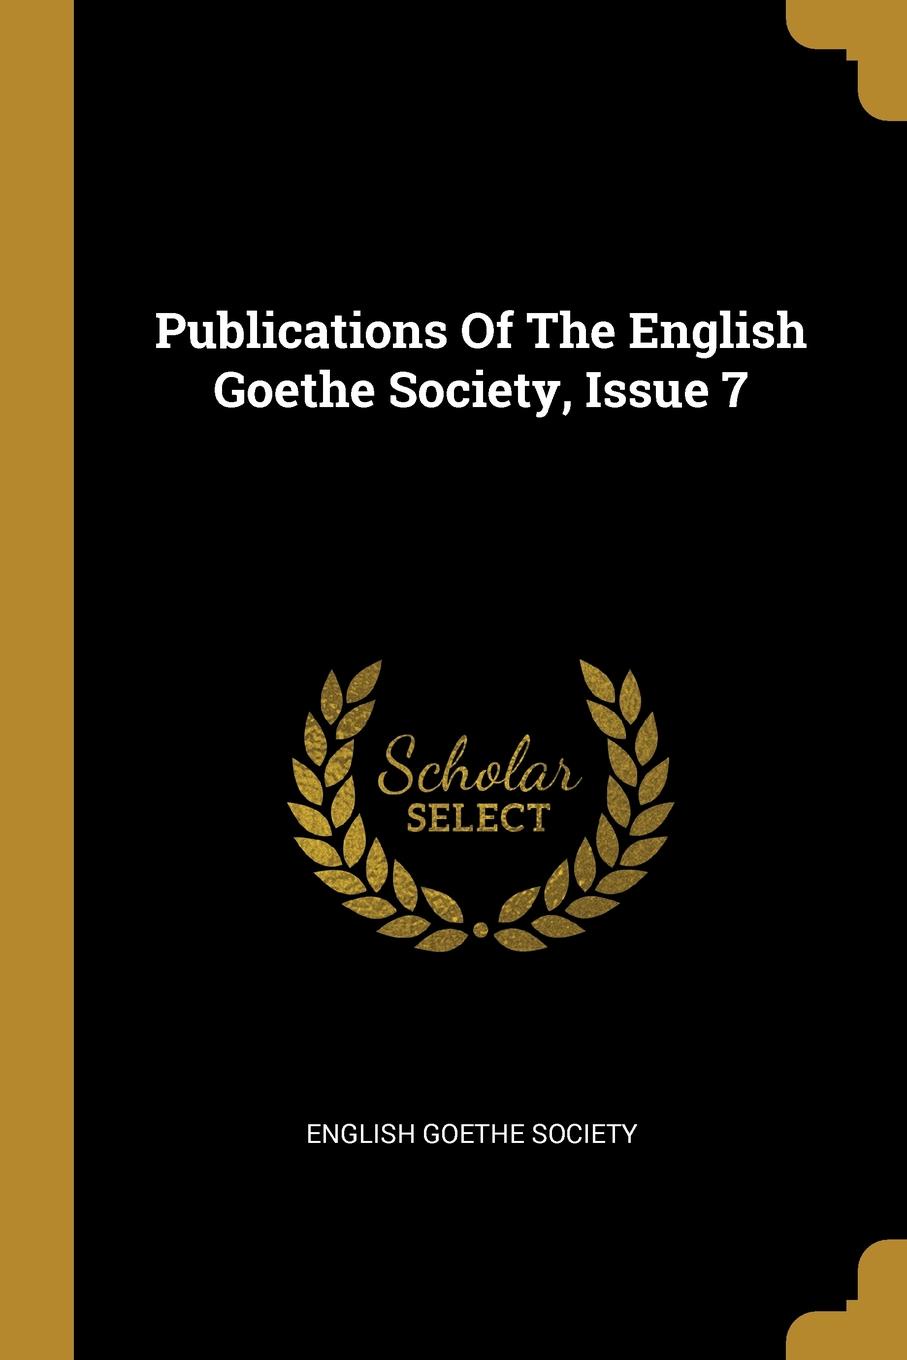 Publications Of The English Goethe Society, Issue 7